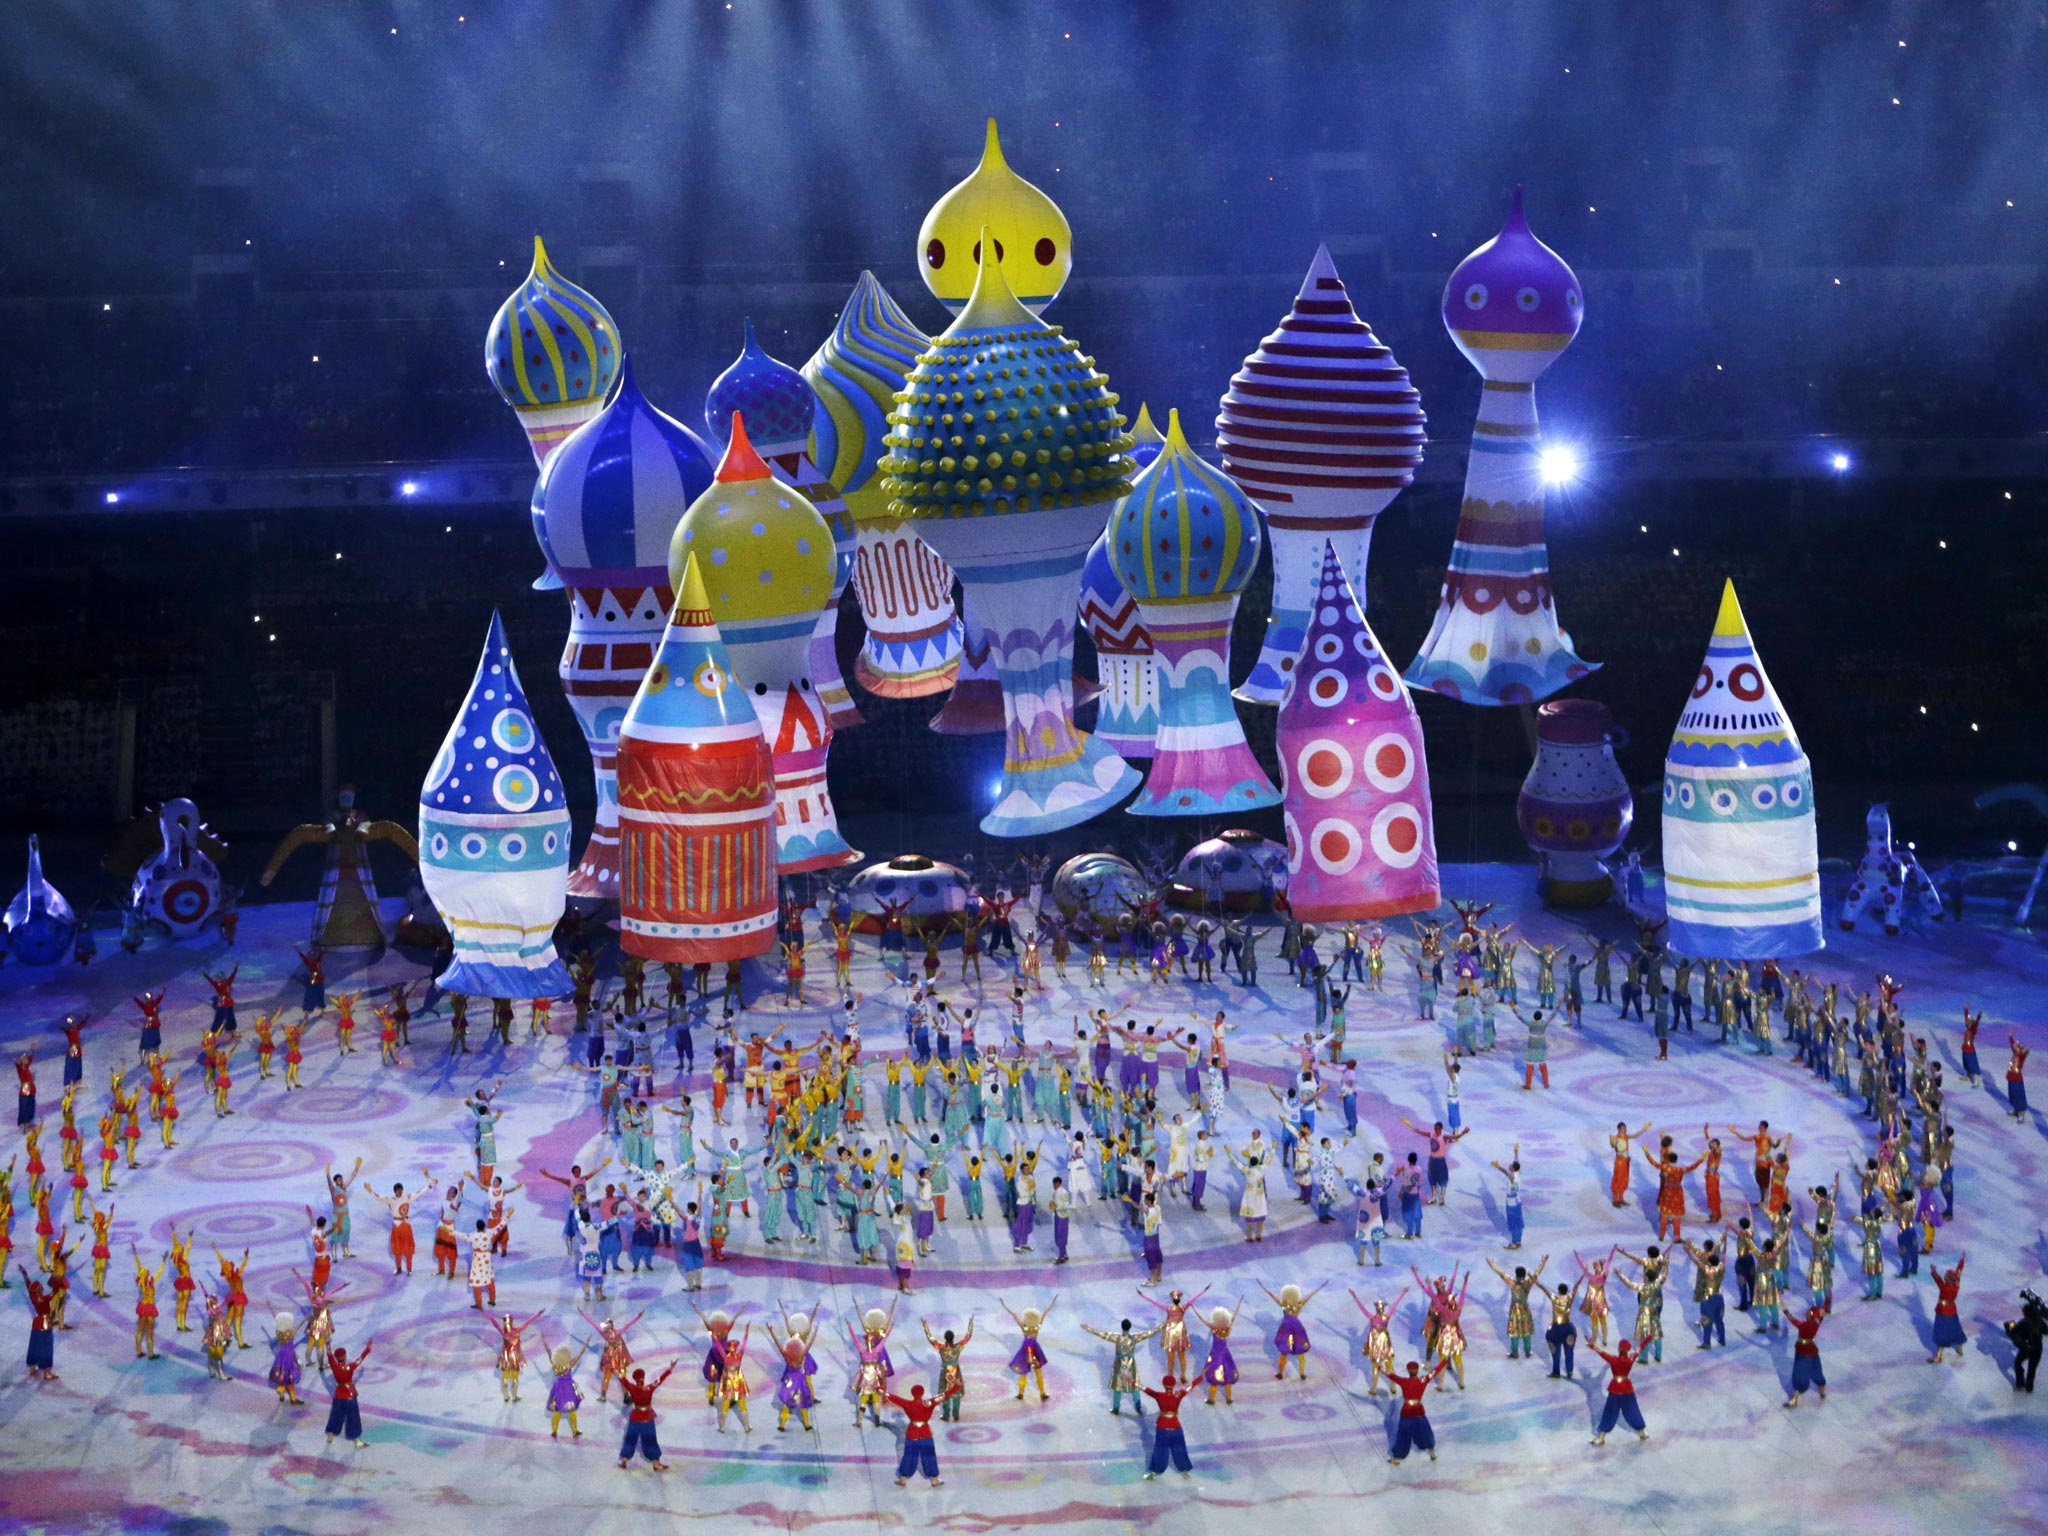 Artists in colourful costumes perform during the opening ceremony of the 2014 Winter Olympics in the Fisht Olympic Stadium Sochi, Russia